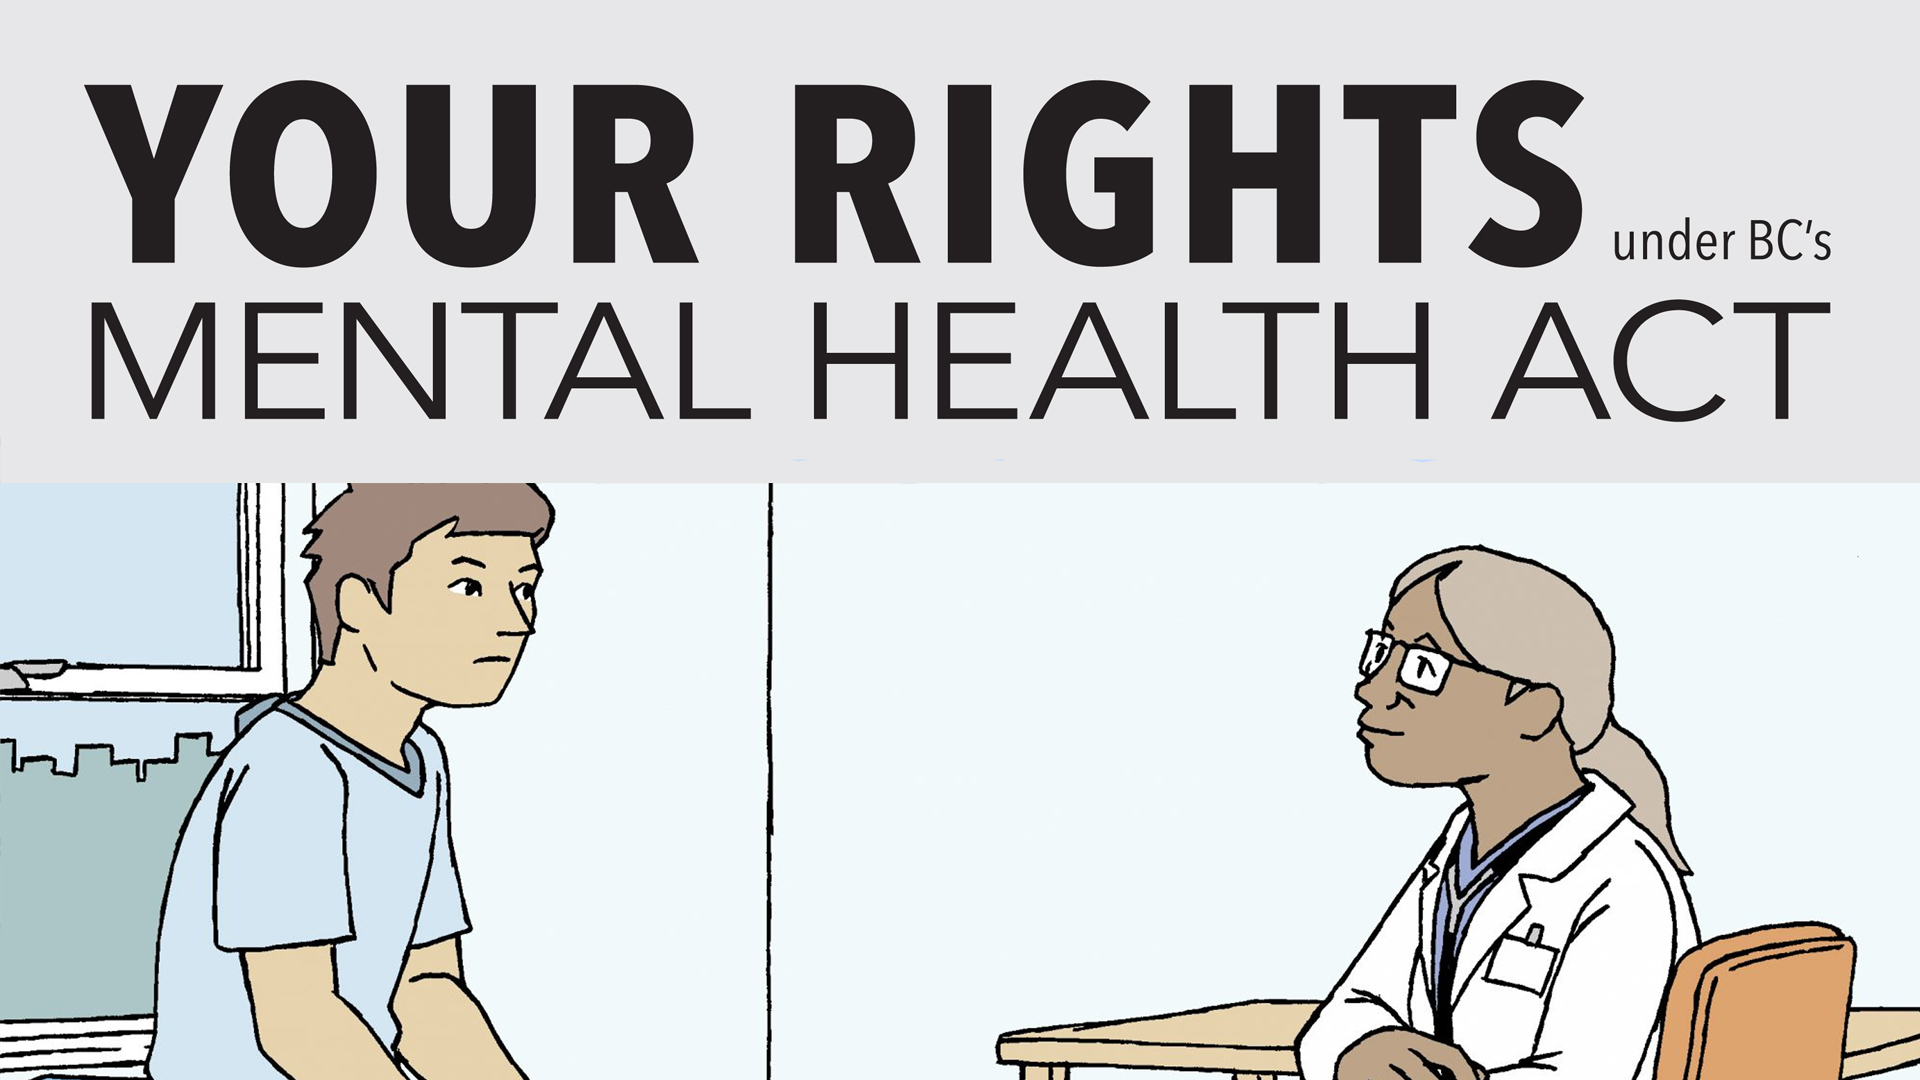 A new suite of Mental Health Act rights communication tools